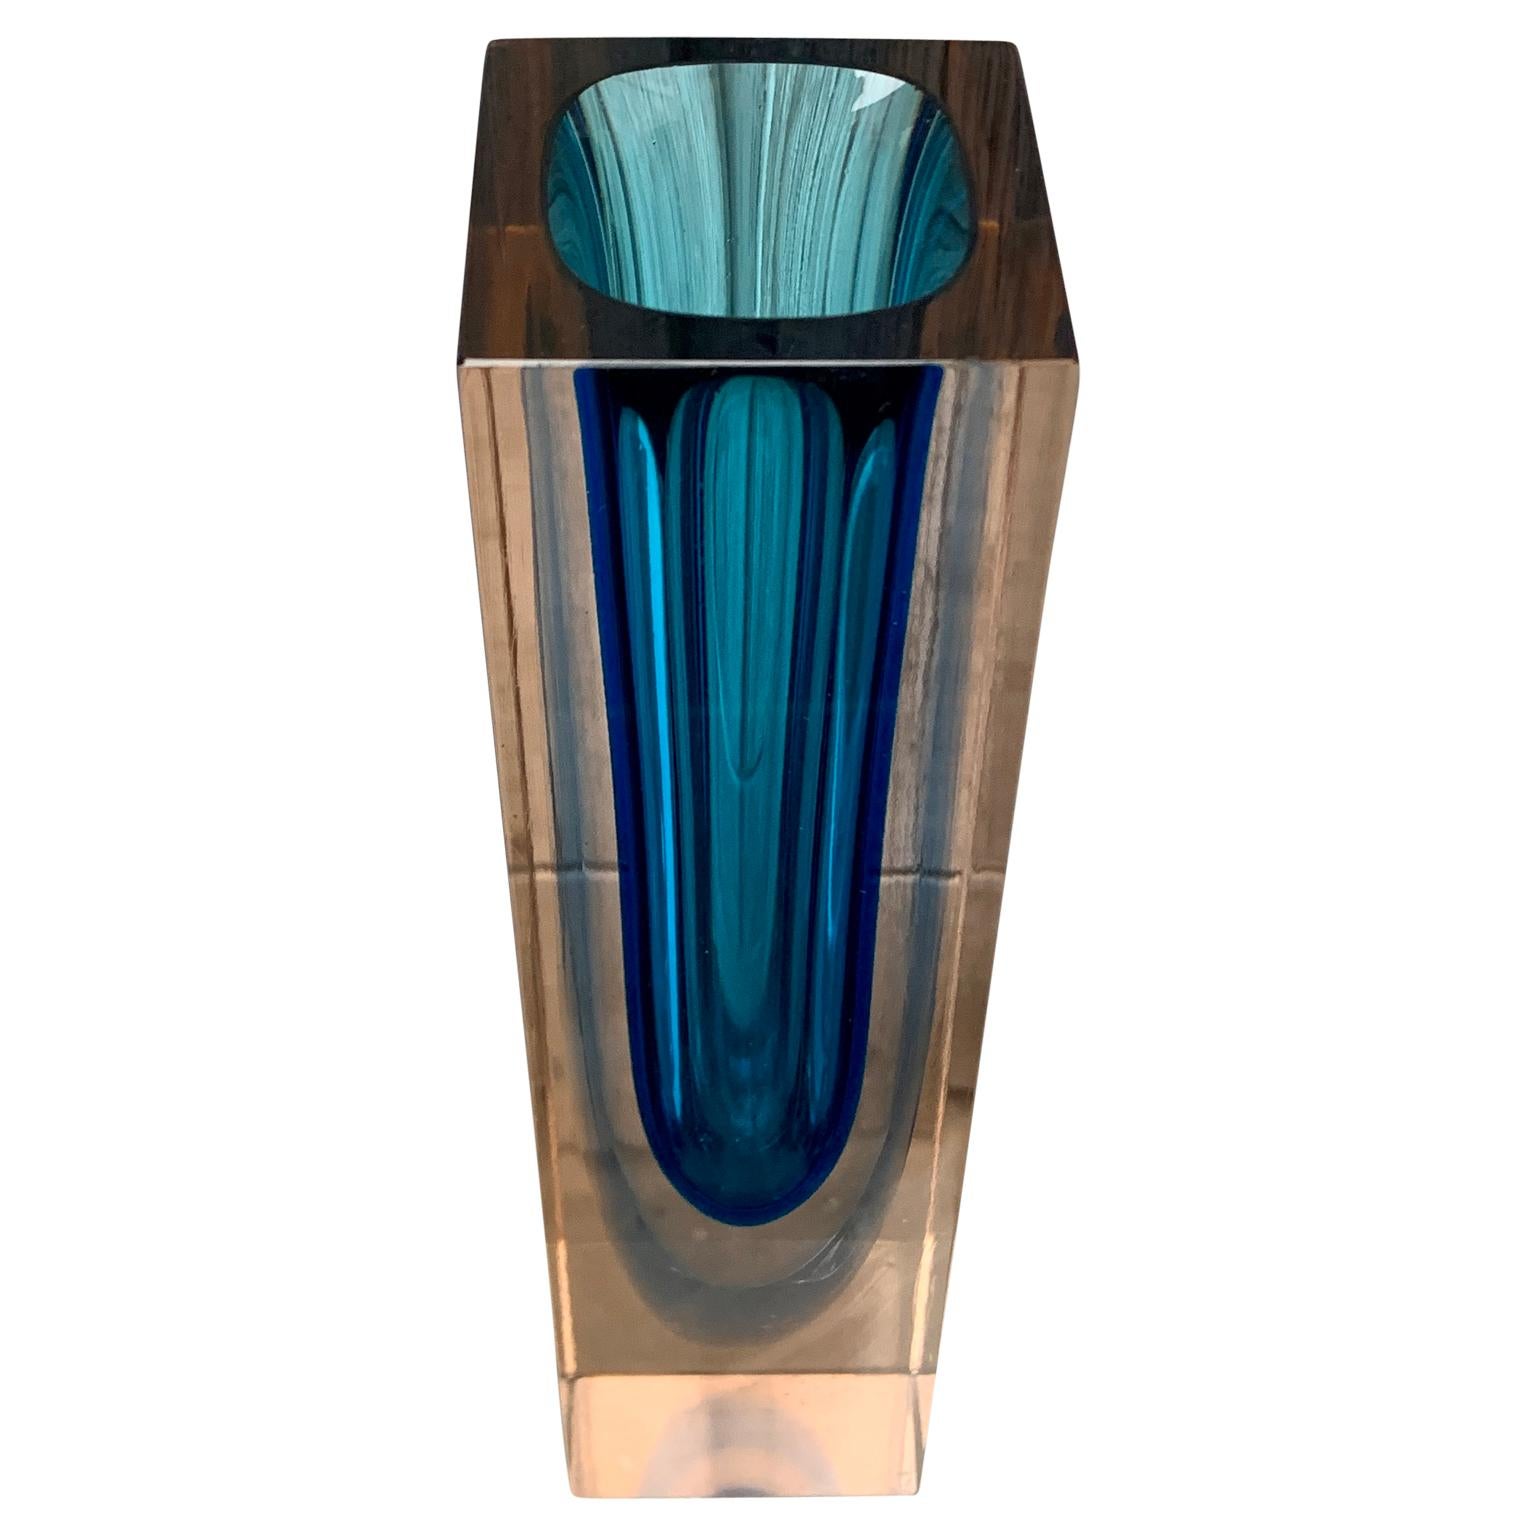 A Venician made Sommerso faceted vase in cobolt blue color by the Murano based artist Flavio Poli. This piece of art is from around 1960 for 